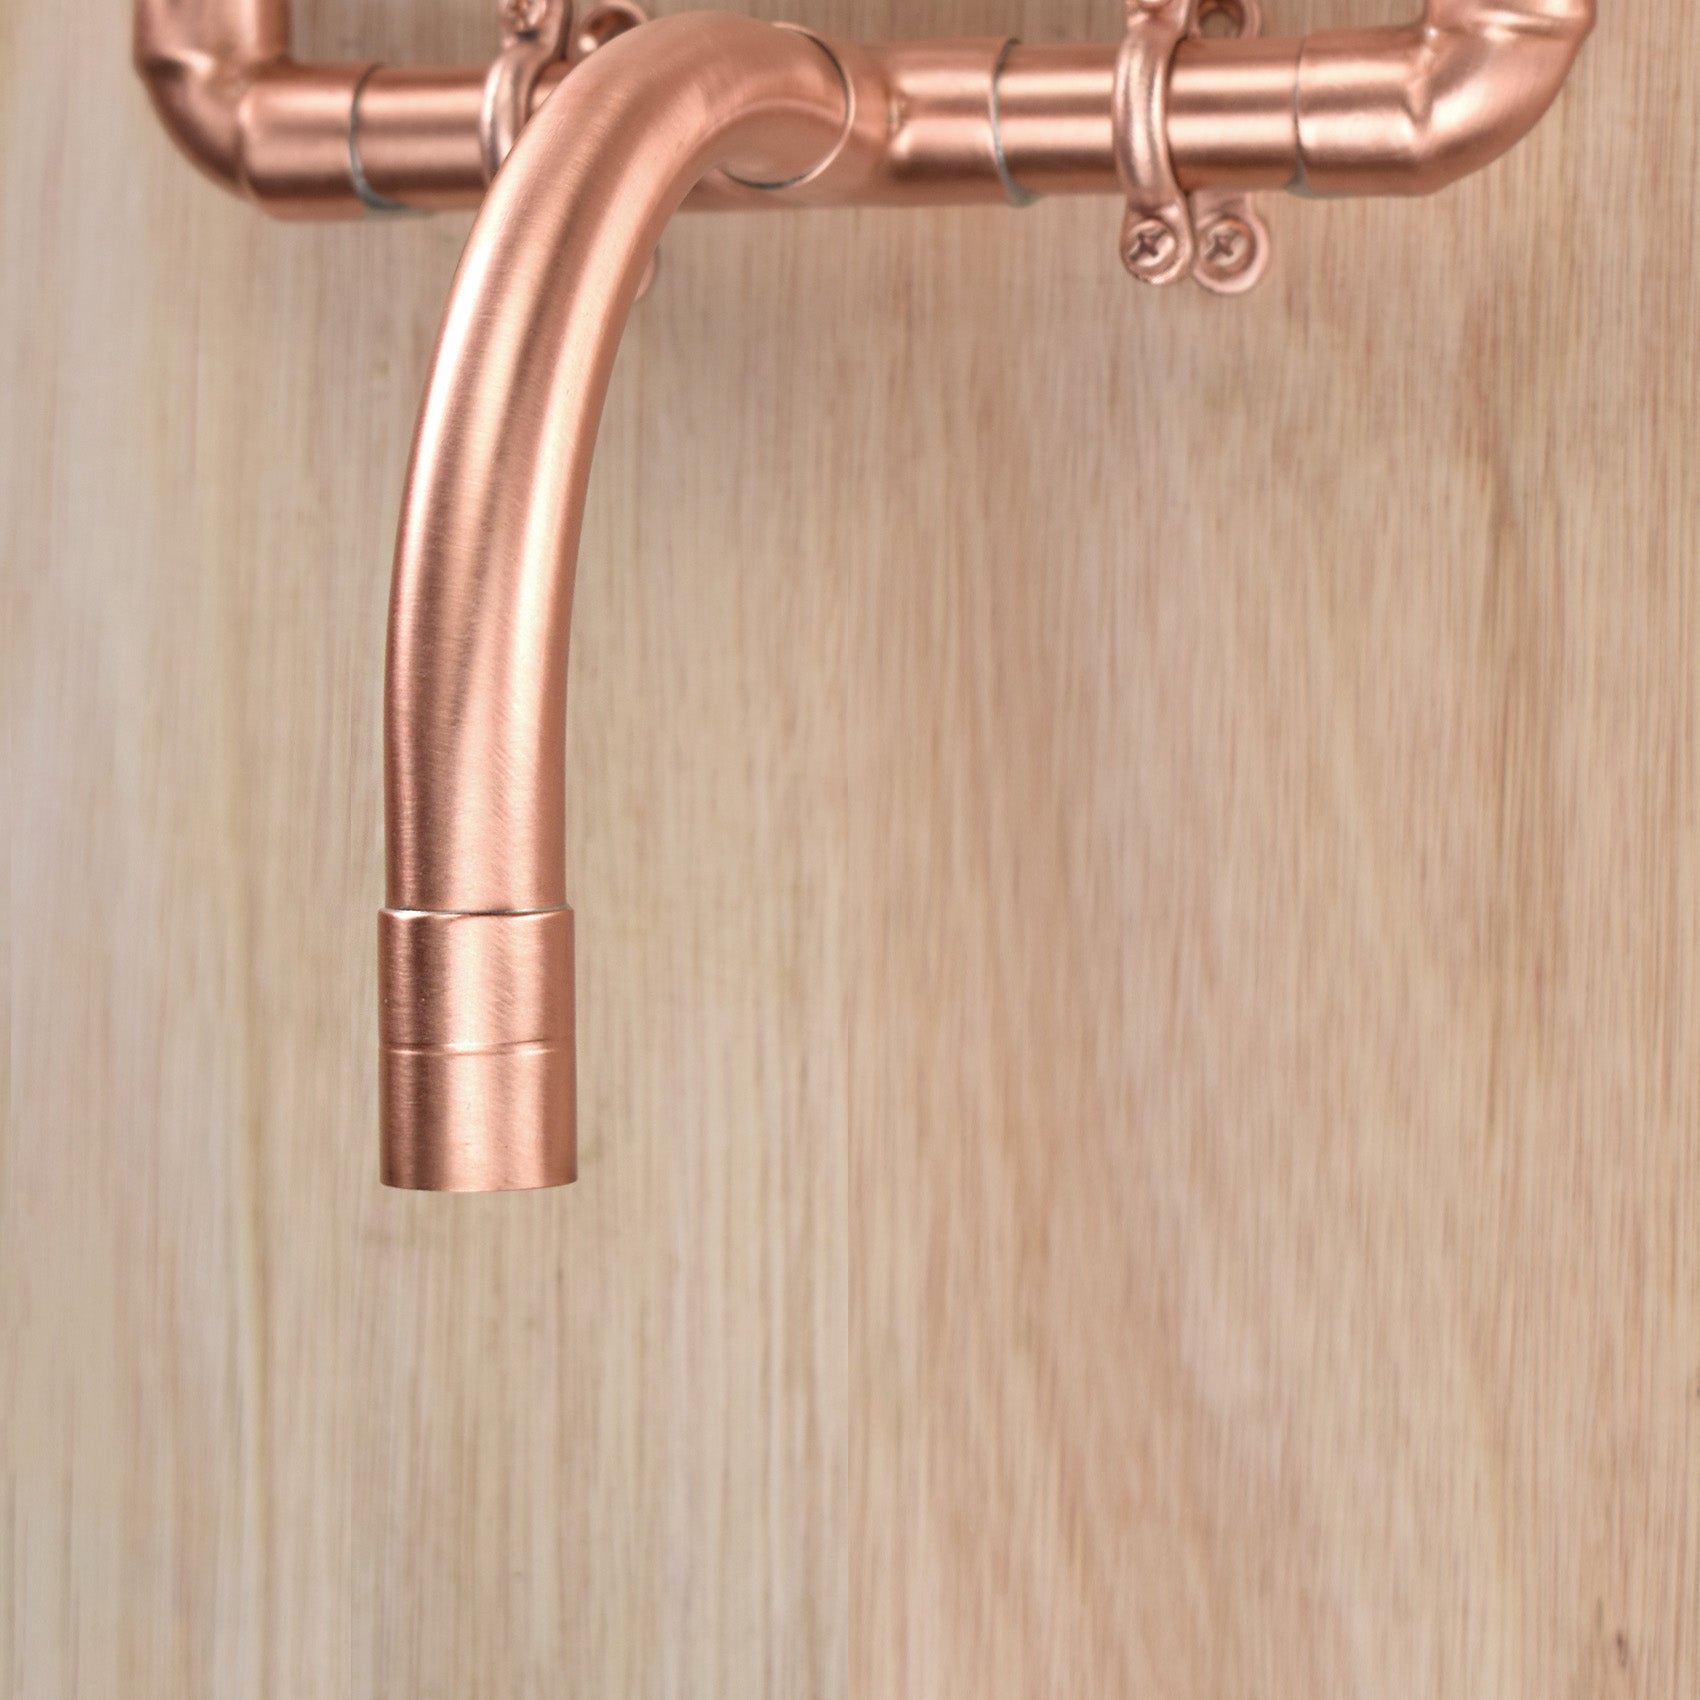 Copper Tap - Purity - Polished tap closeup